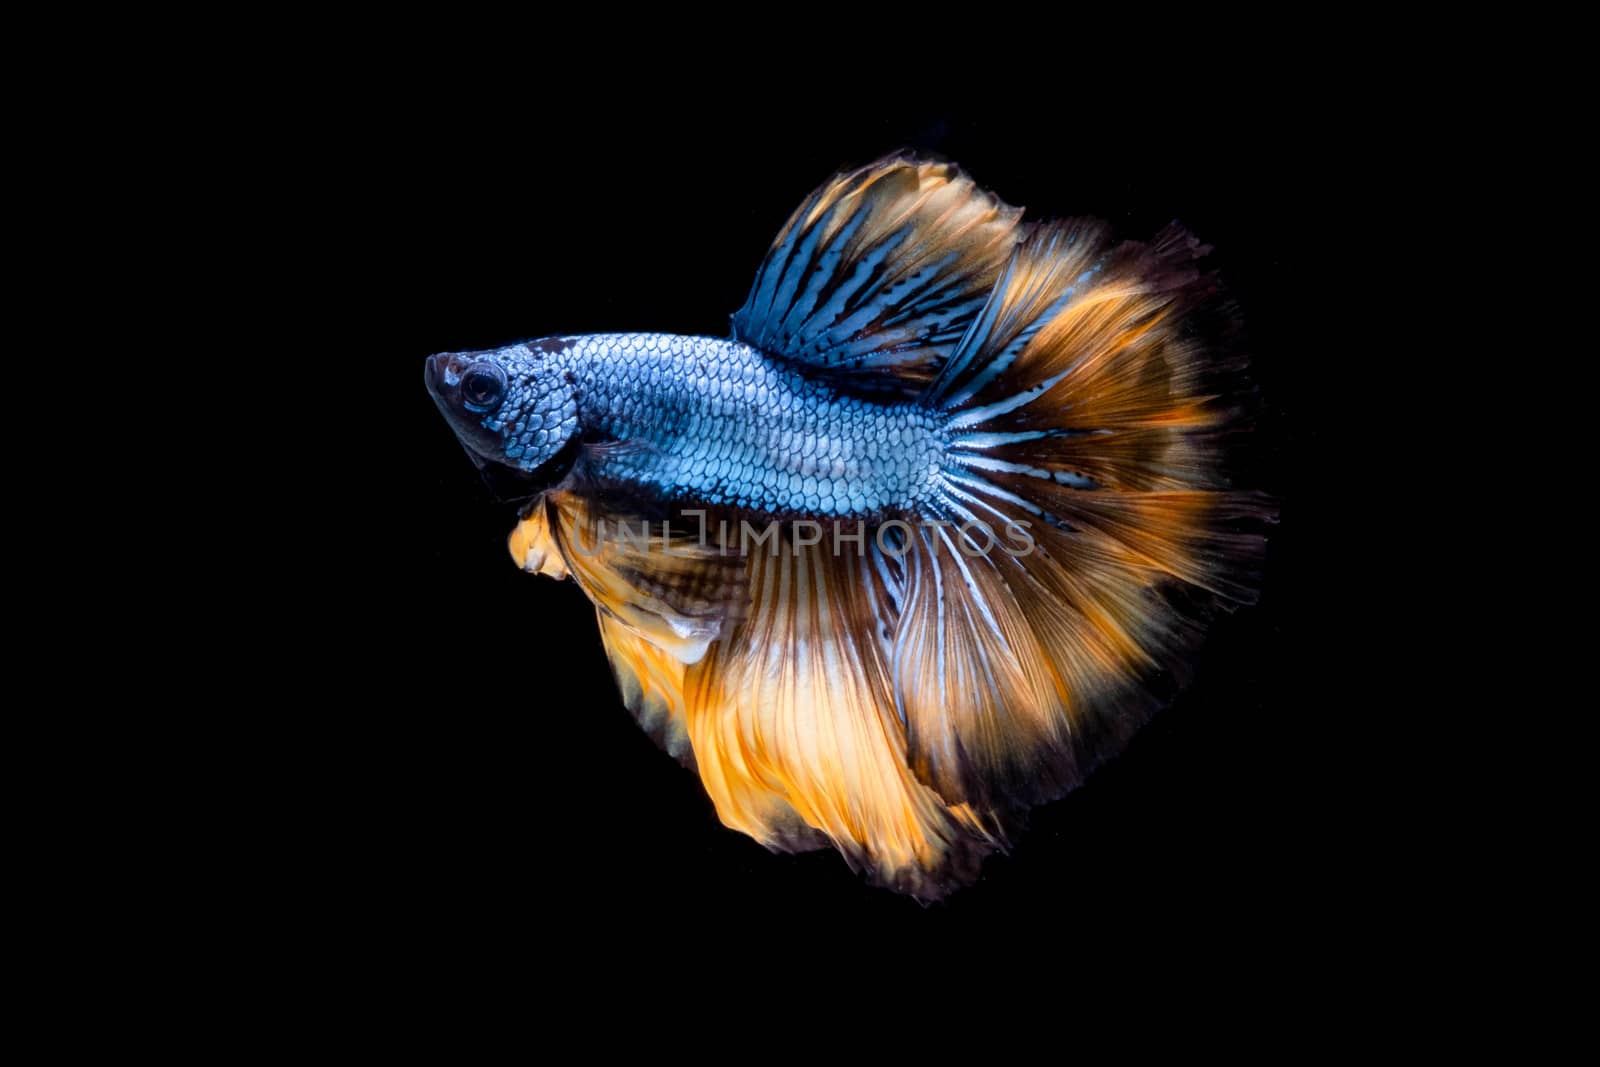 The Moving Moment of Blue Grey Gold Metallic Half Moon Betta Splendens or Siamese Fighting Fish on Black Background